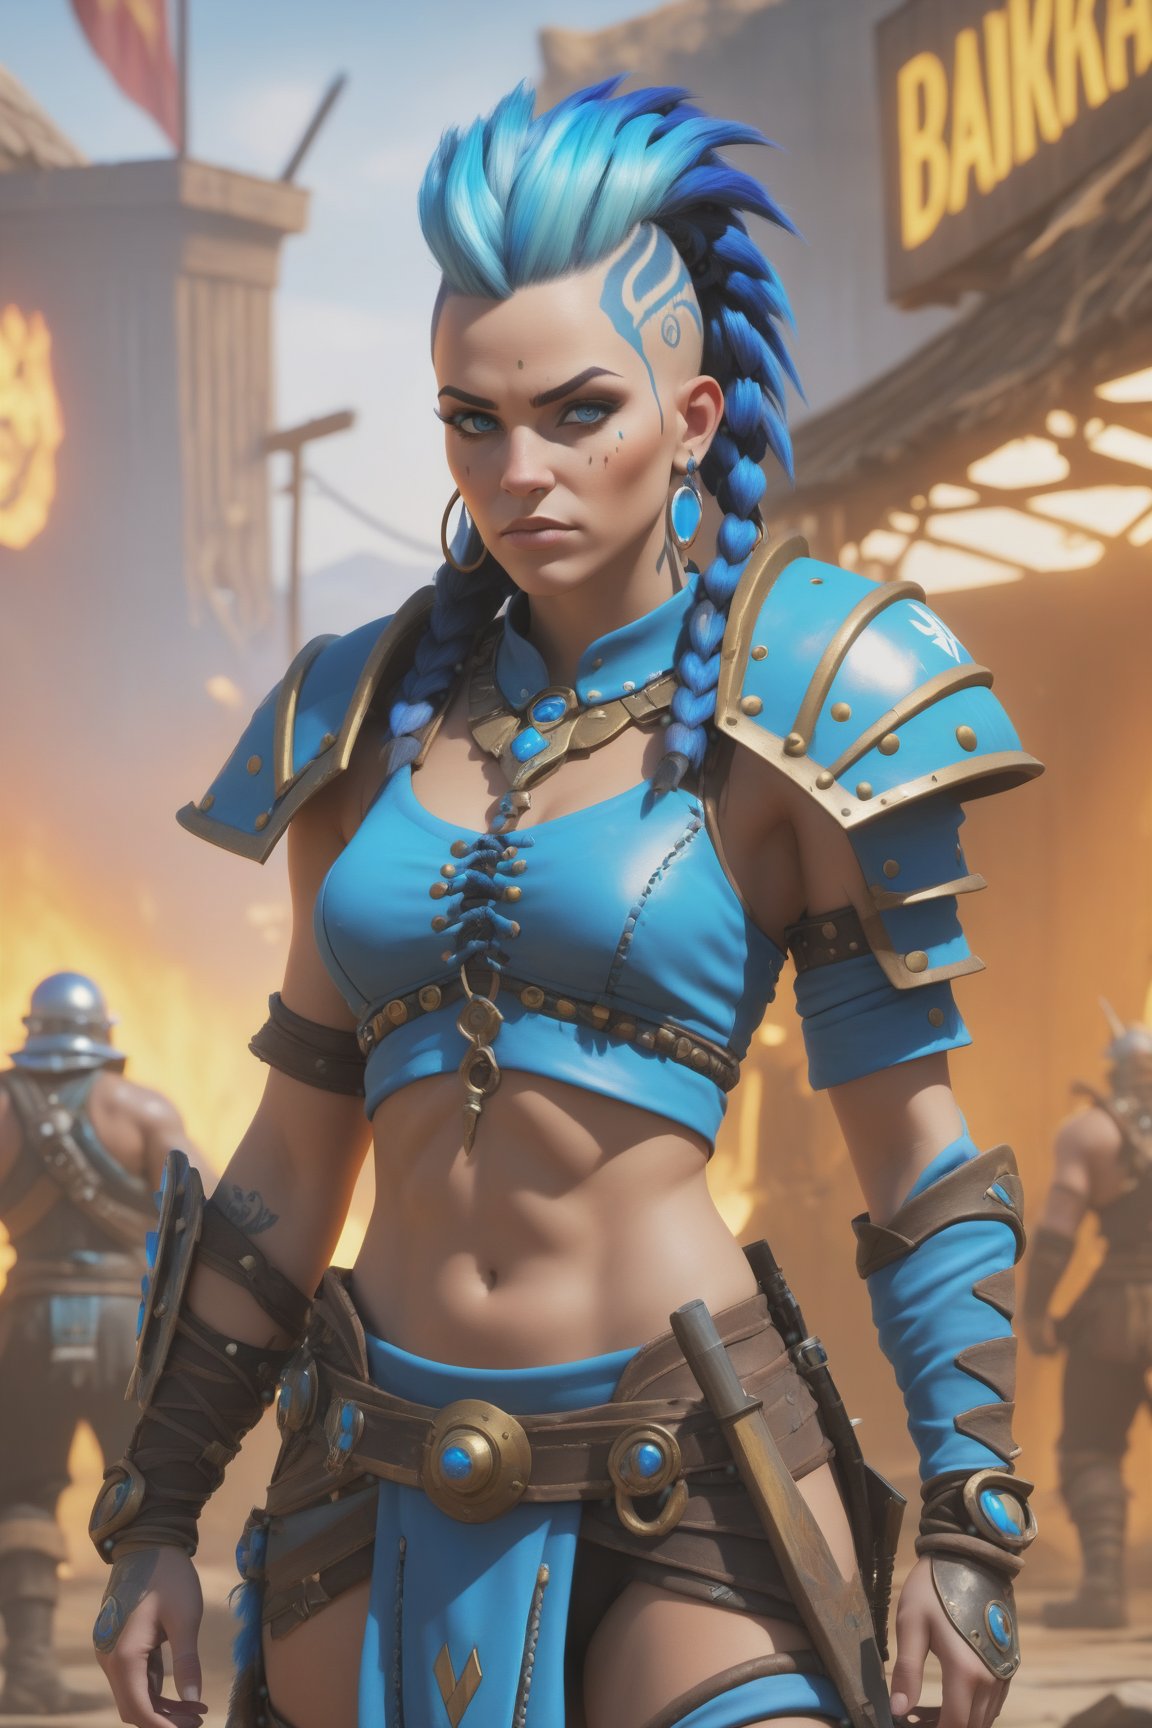 (best quality), (4K, HDR), barbarian junker queen, tall woman, blue mohawk hair braids, shining body, glowing look, looking at camera, fallout style armor and clothing, fantasy, vibrant colors, 